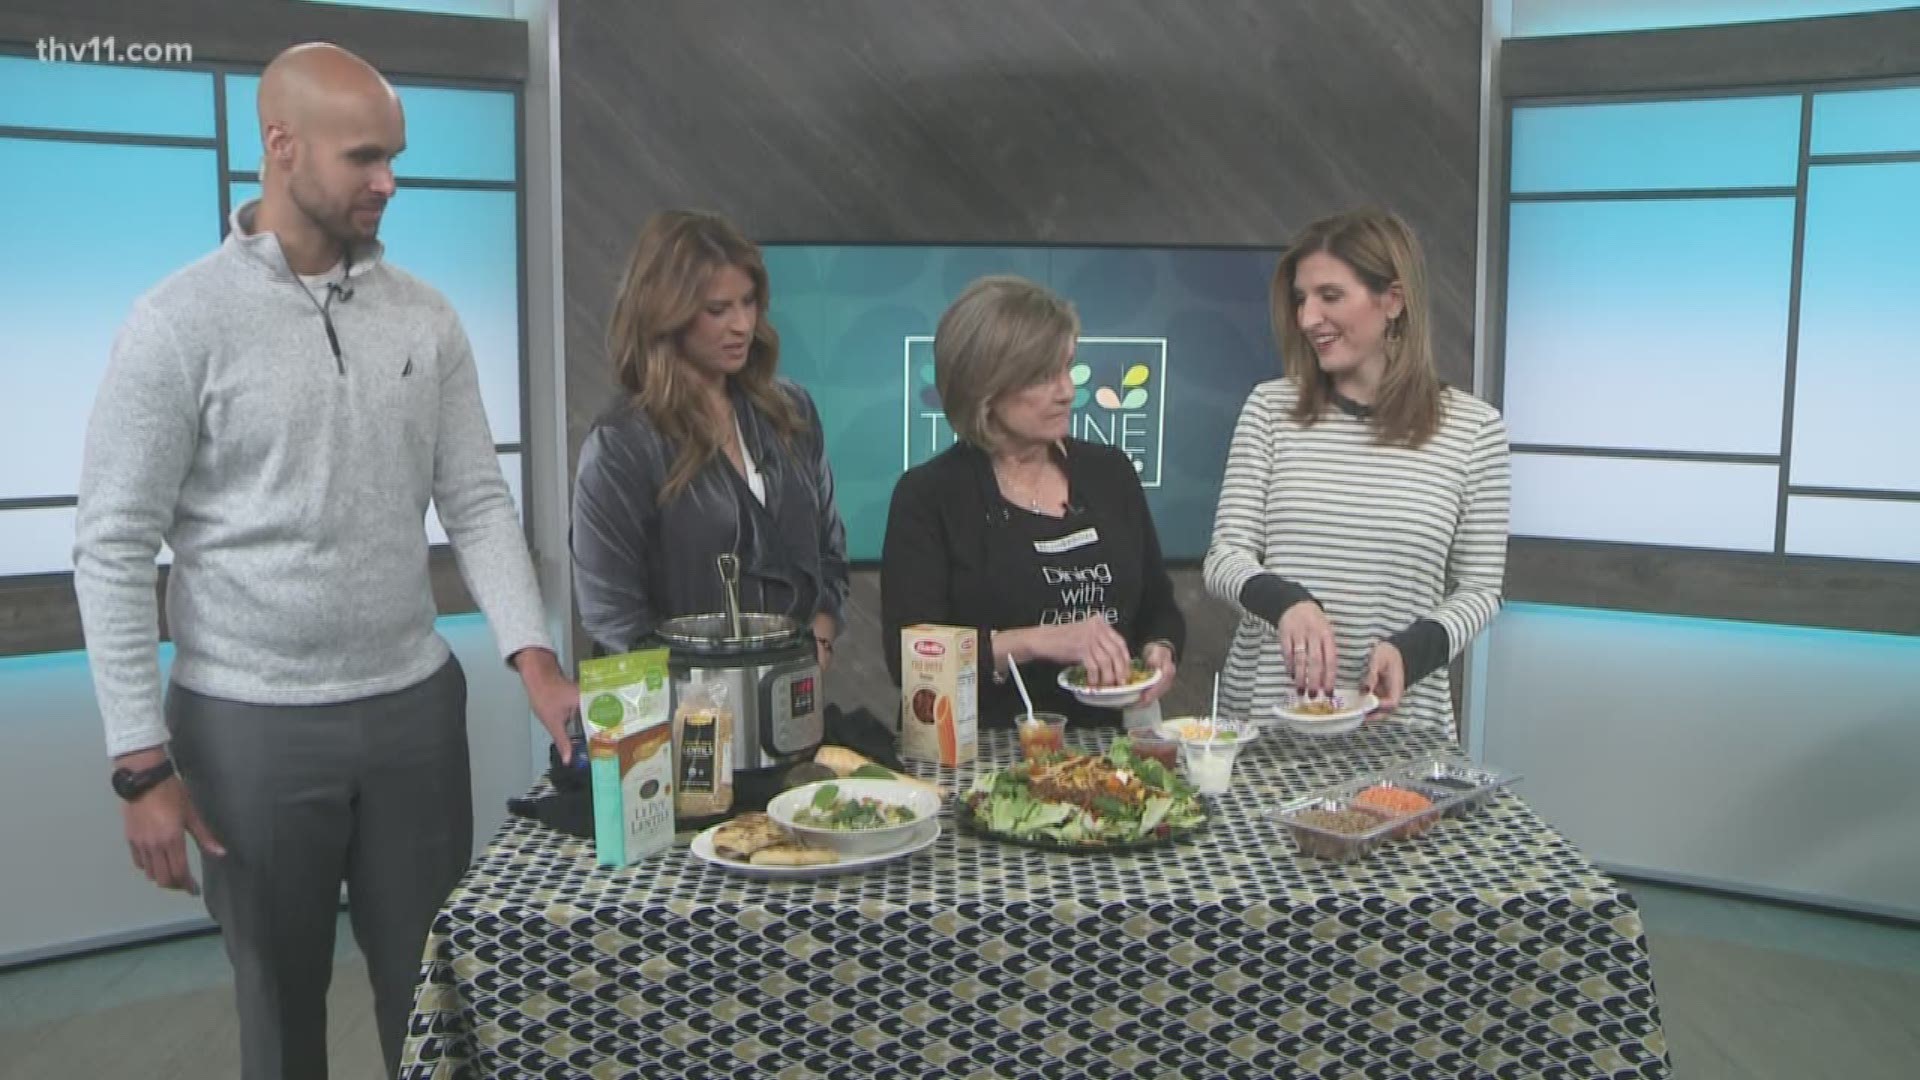 Debbie Arnold is here to help us fall in love with lentils!